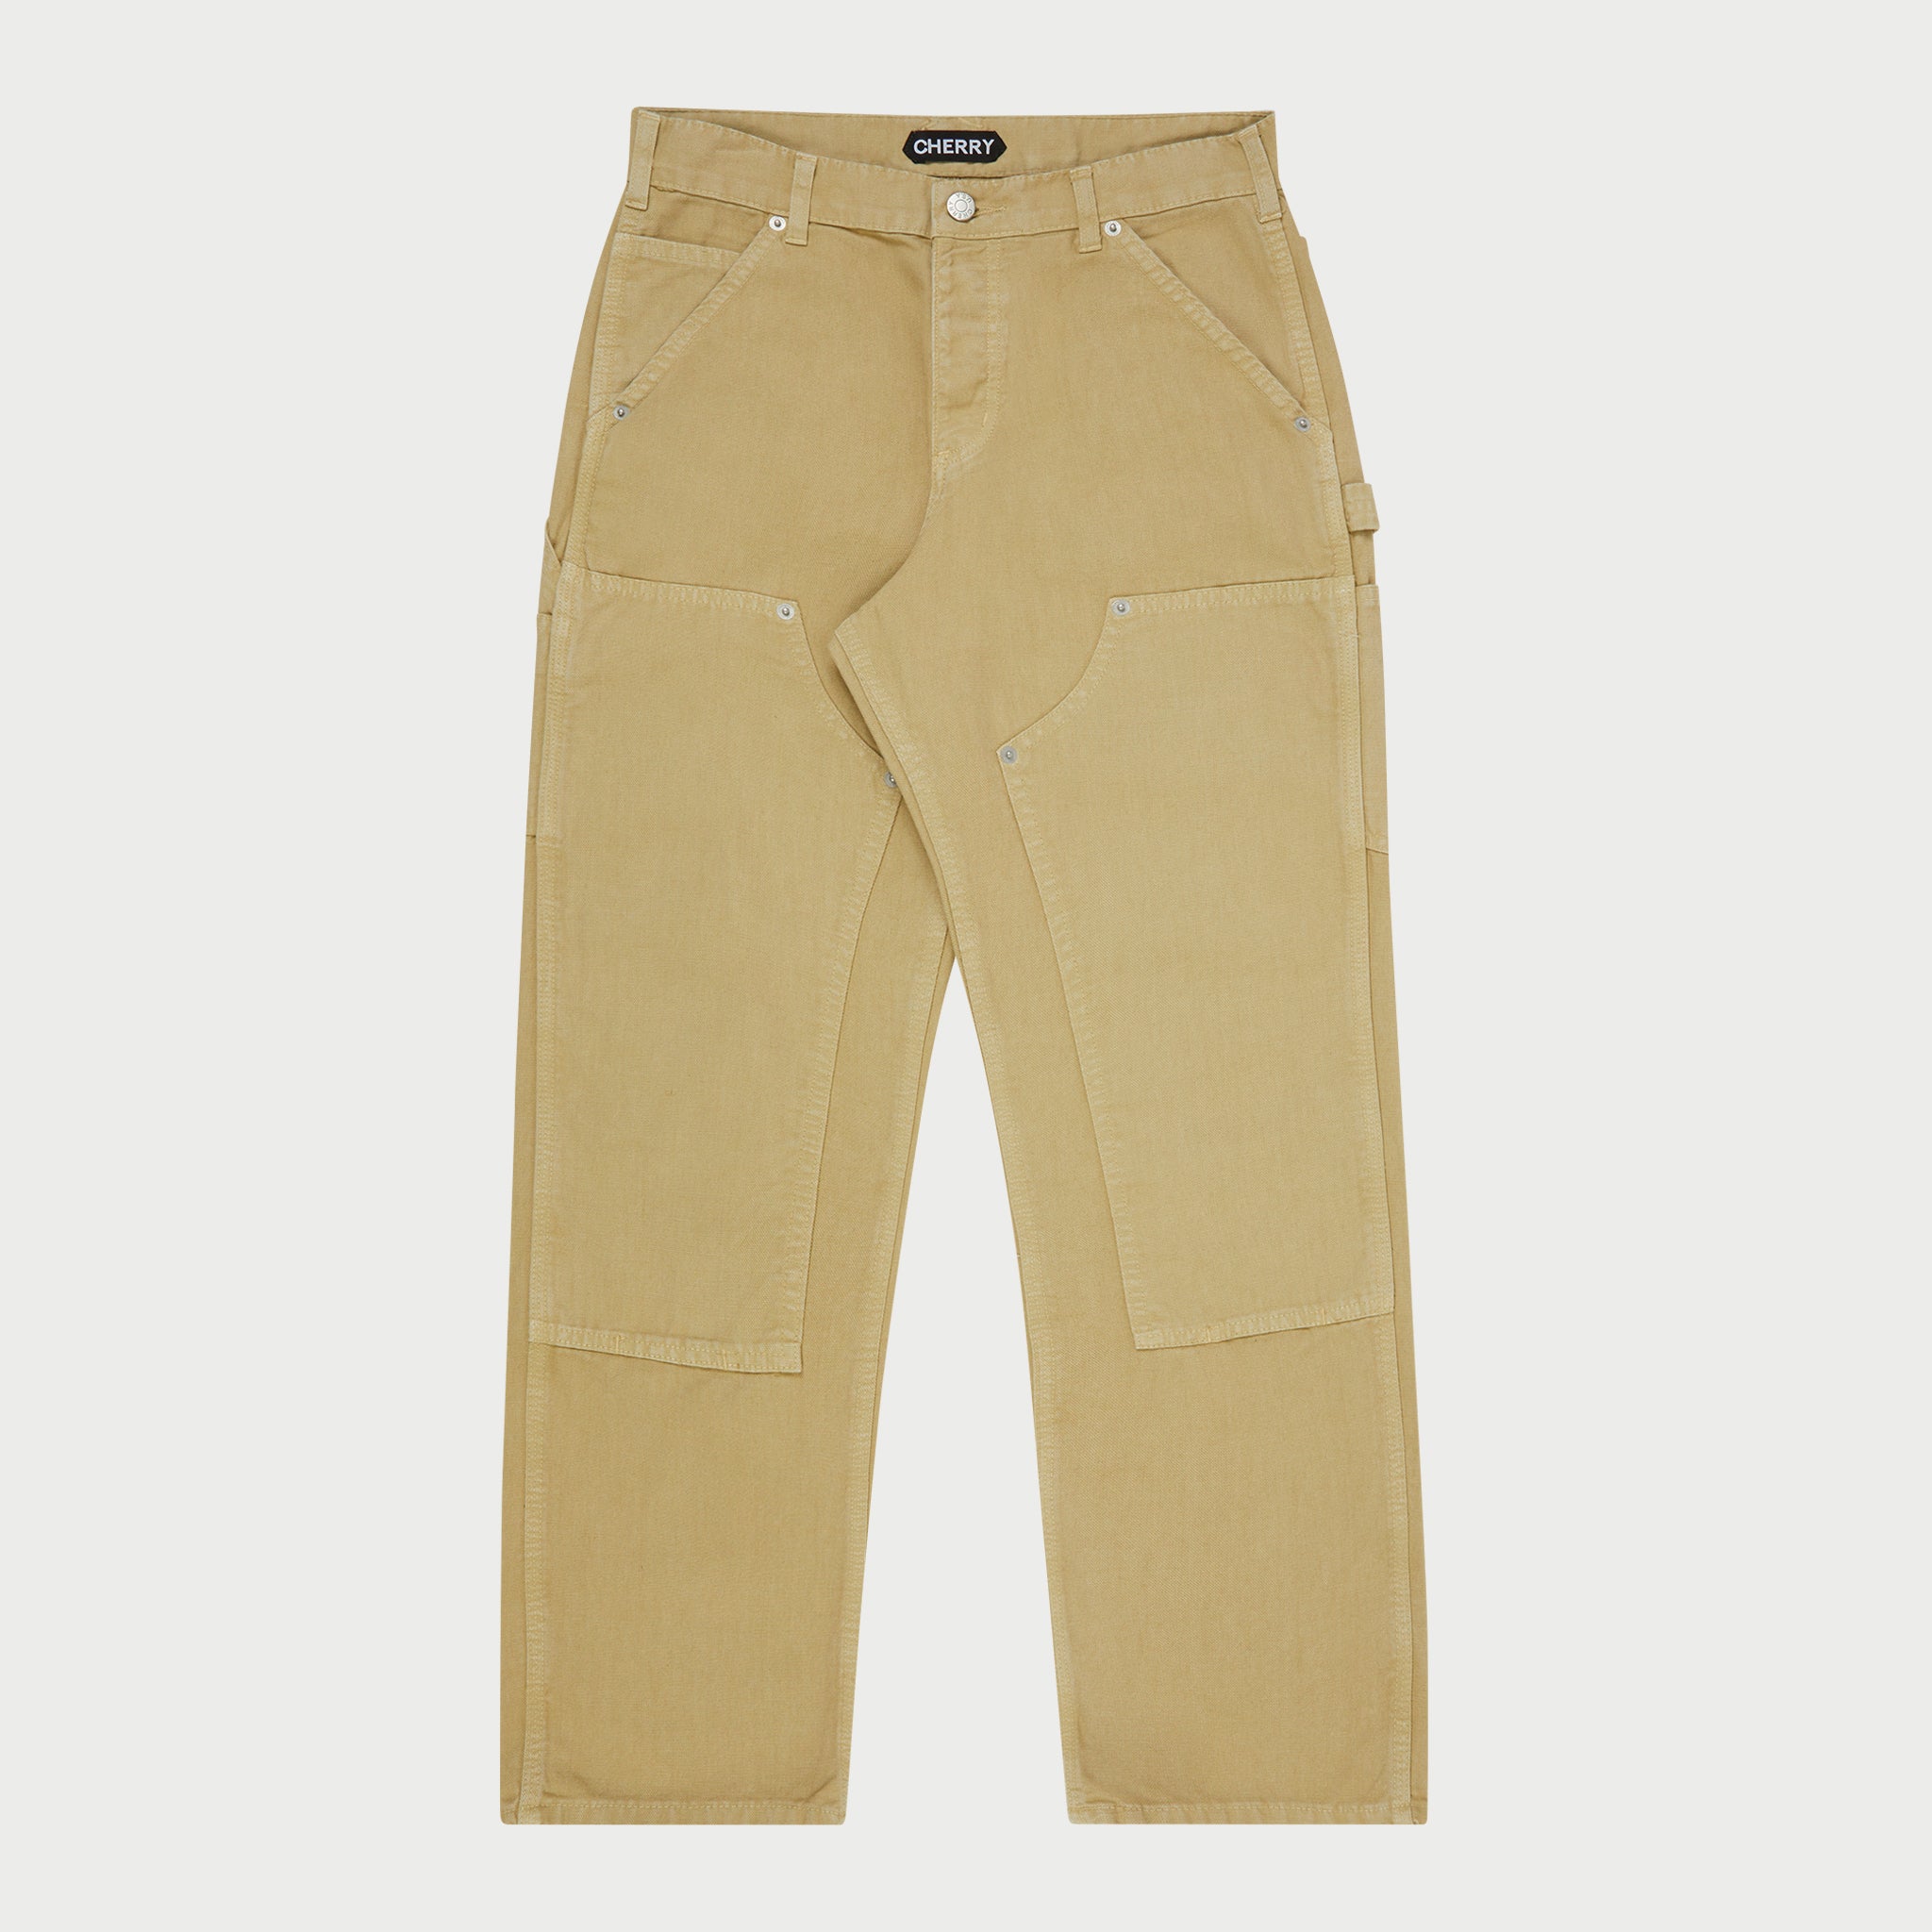 Classic Canvas Double Knee (Tan)